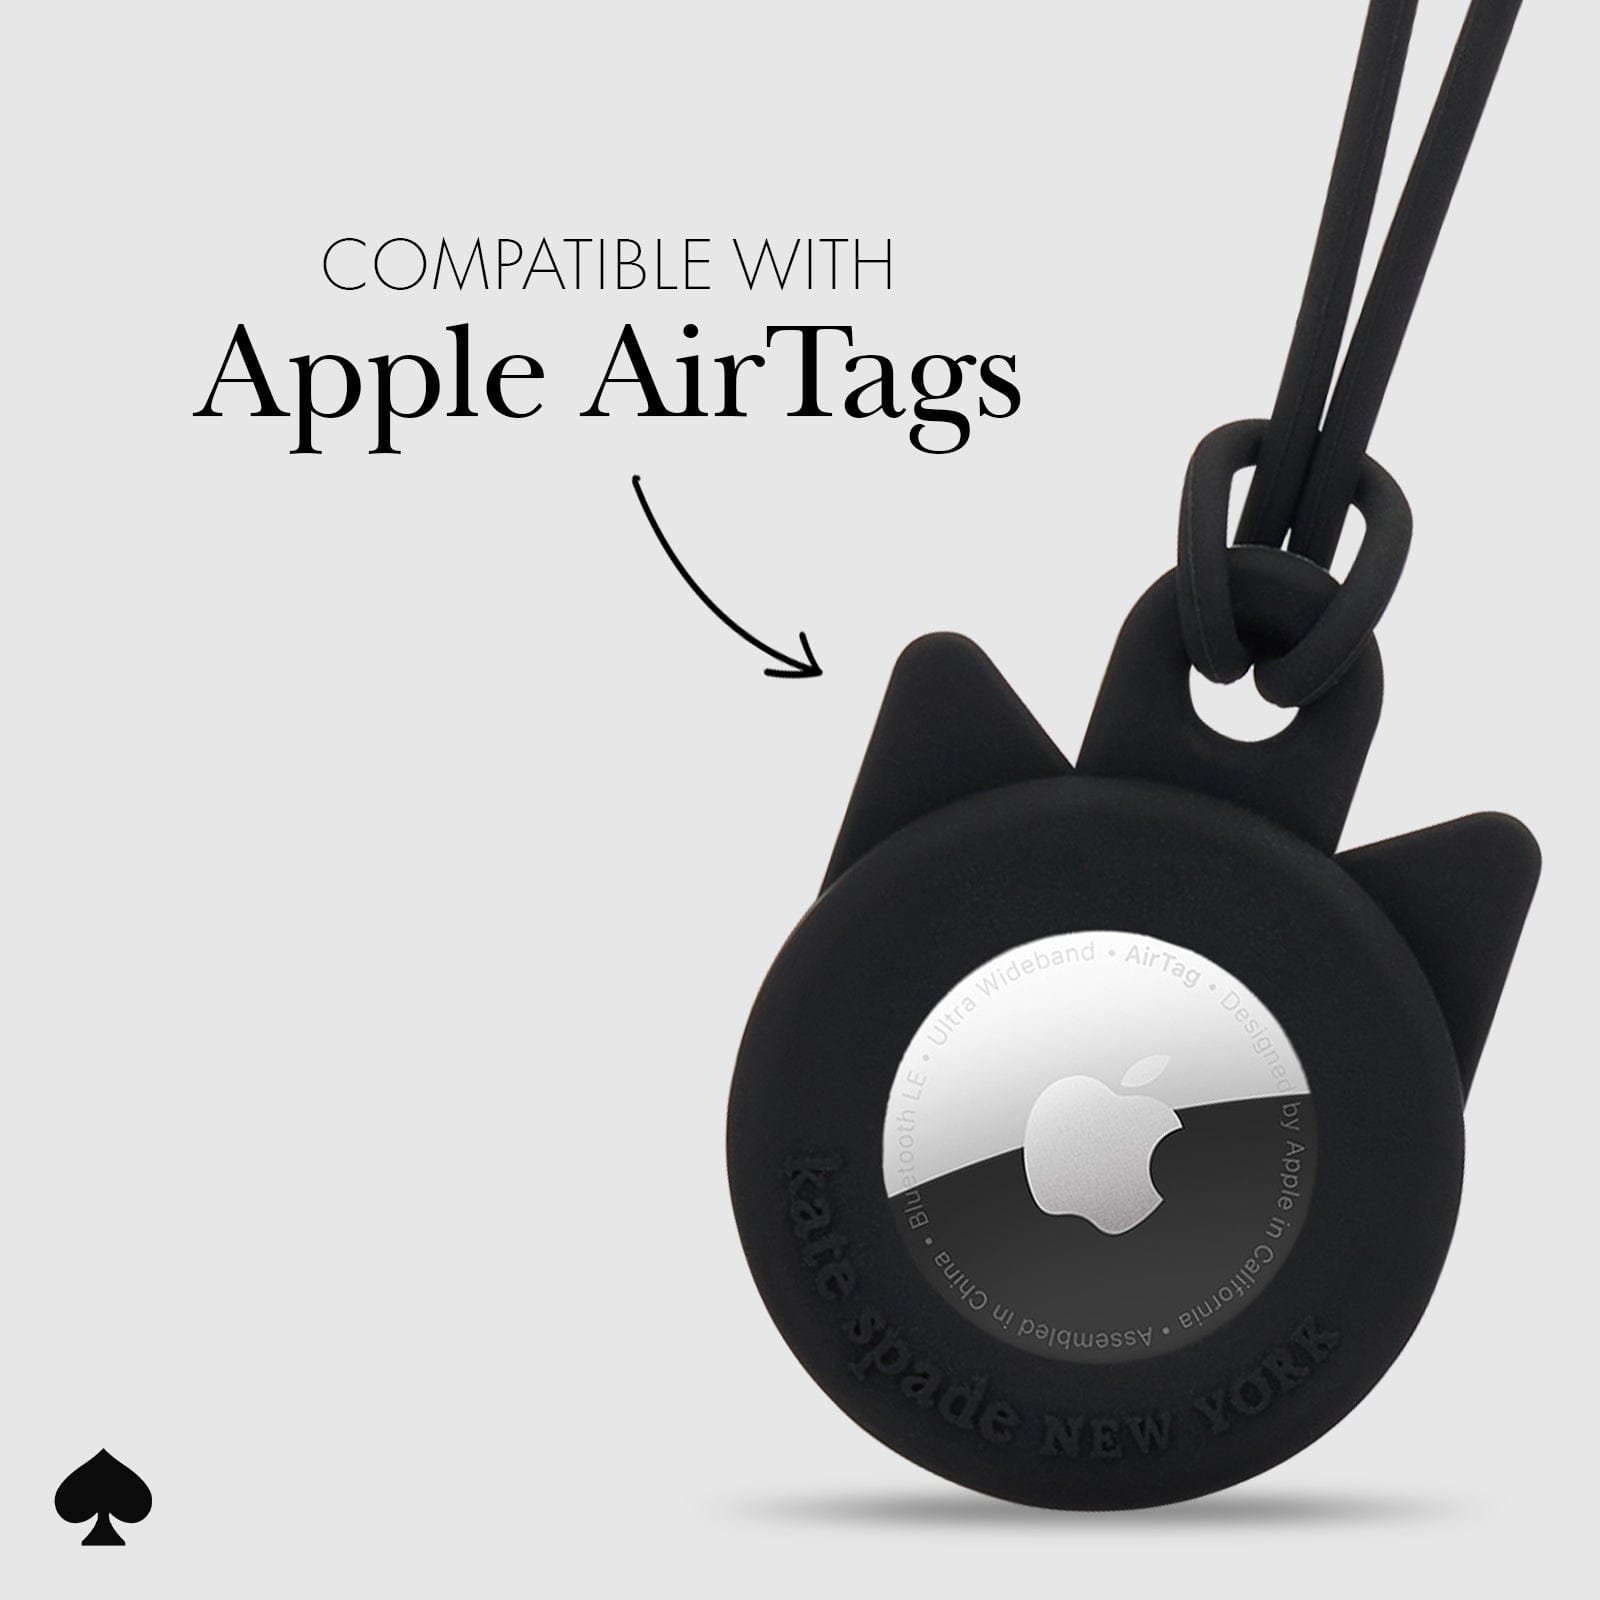 COMPATIBLE WITH APPLE AIRTAGS